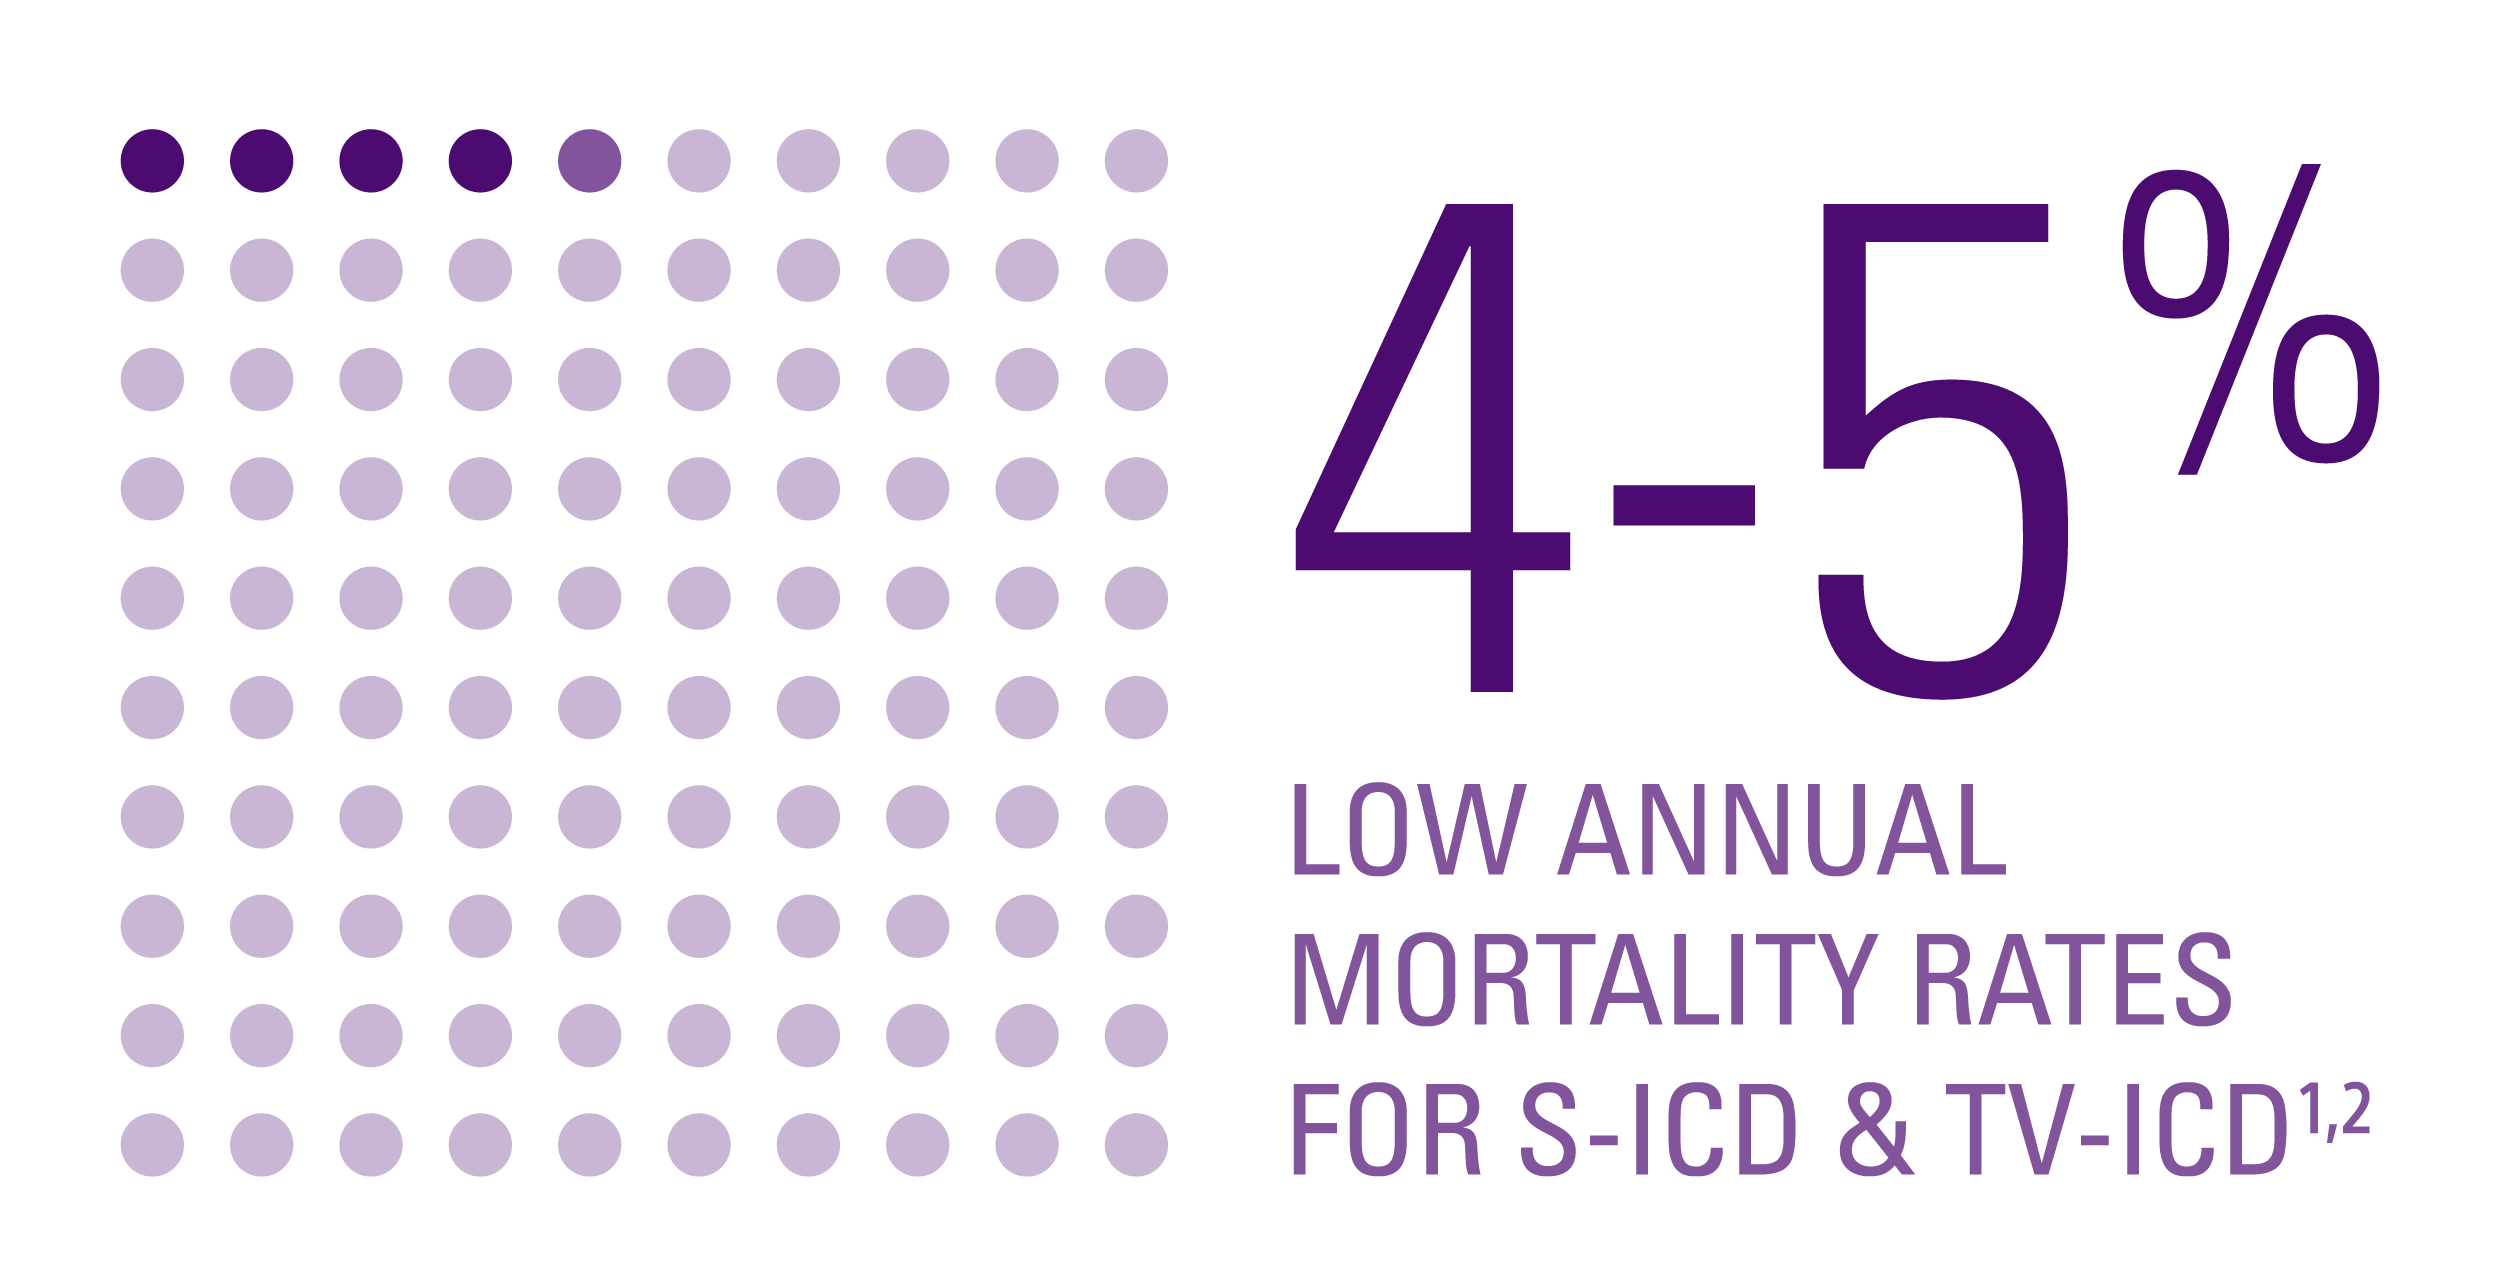 4 to 5% low annual mortality rates for S-ICD and TV-ICD.
